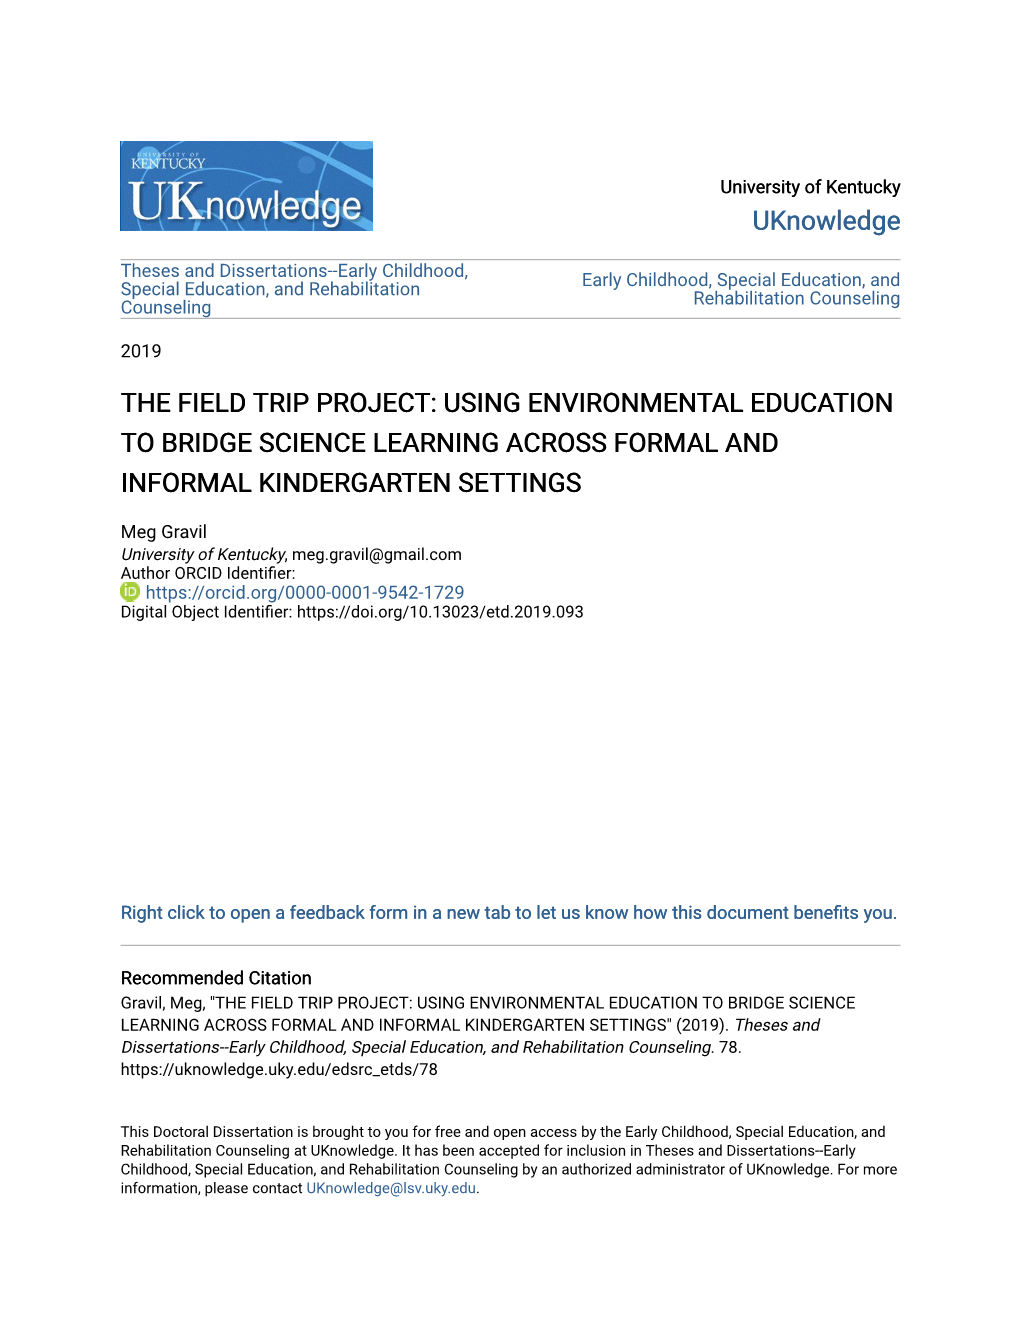 The Field Trip Project: Using Environmental Education to Bridge Science Learning Across Formal and Informal Kindergarten Settings